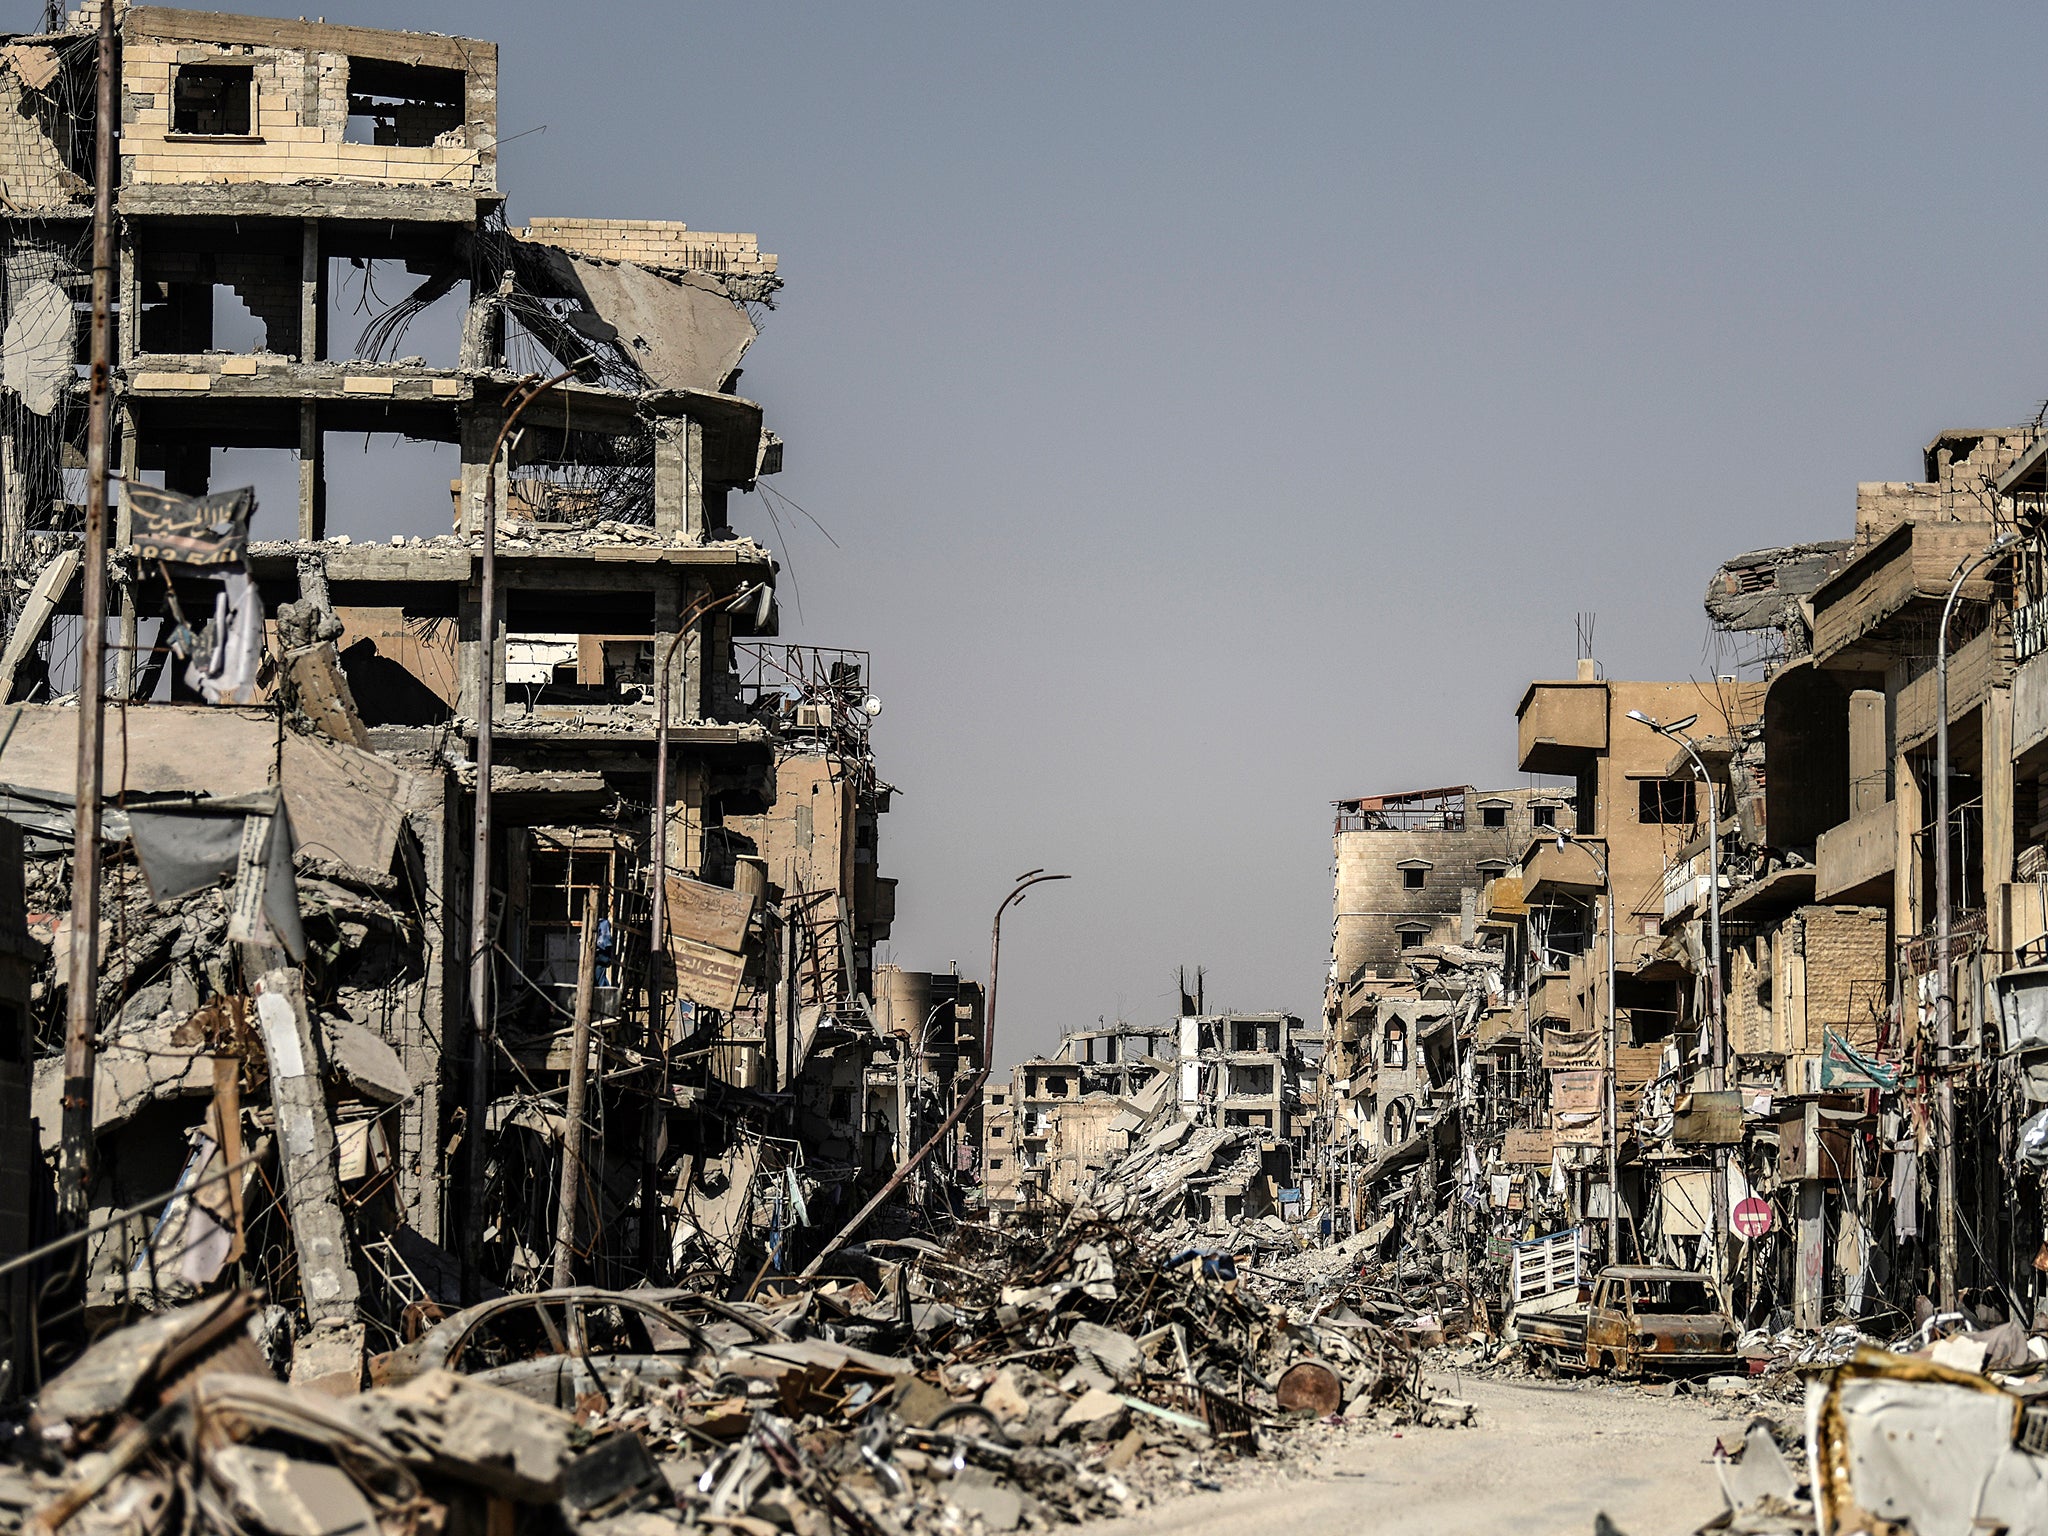 The war in Syria has caused untold death and destruction